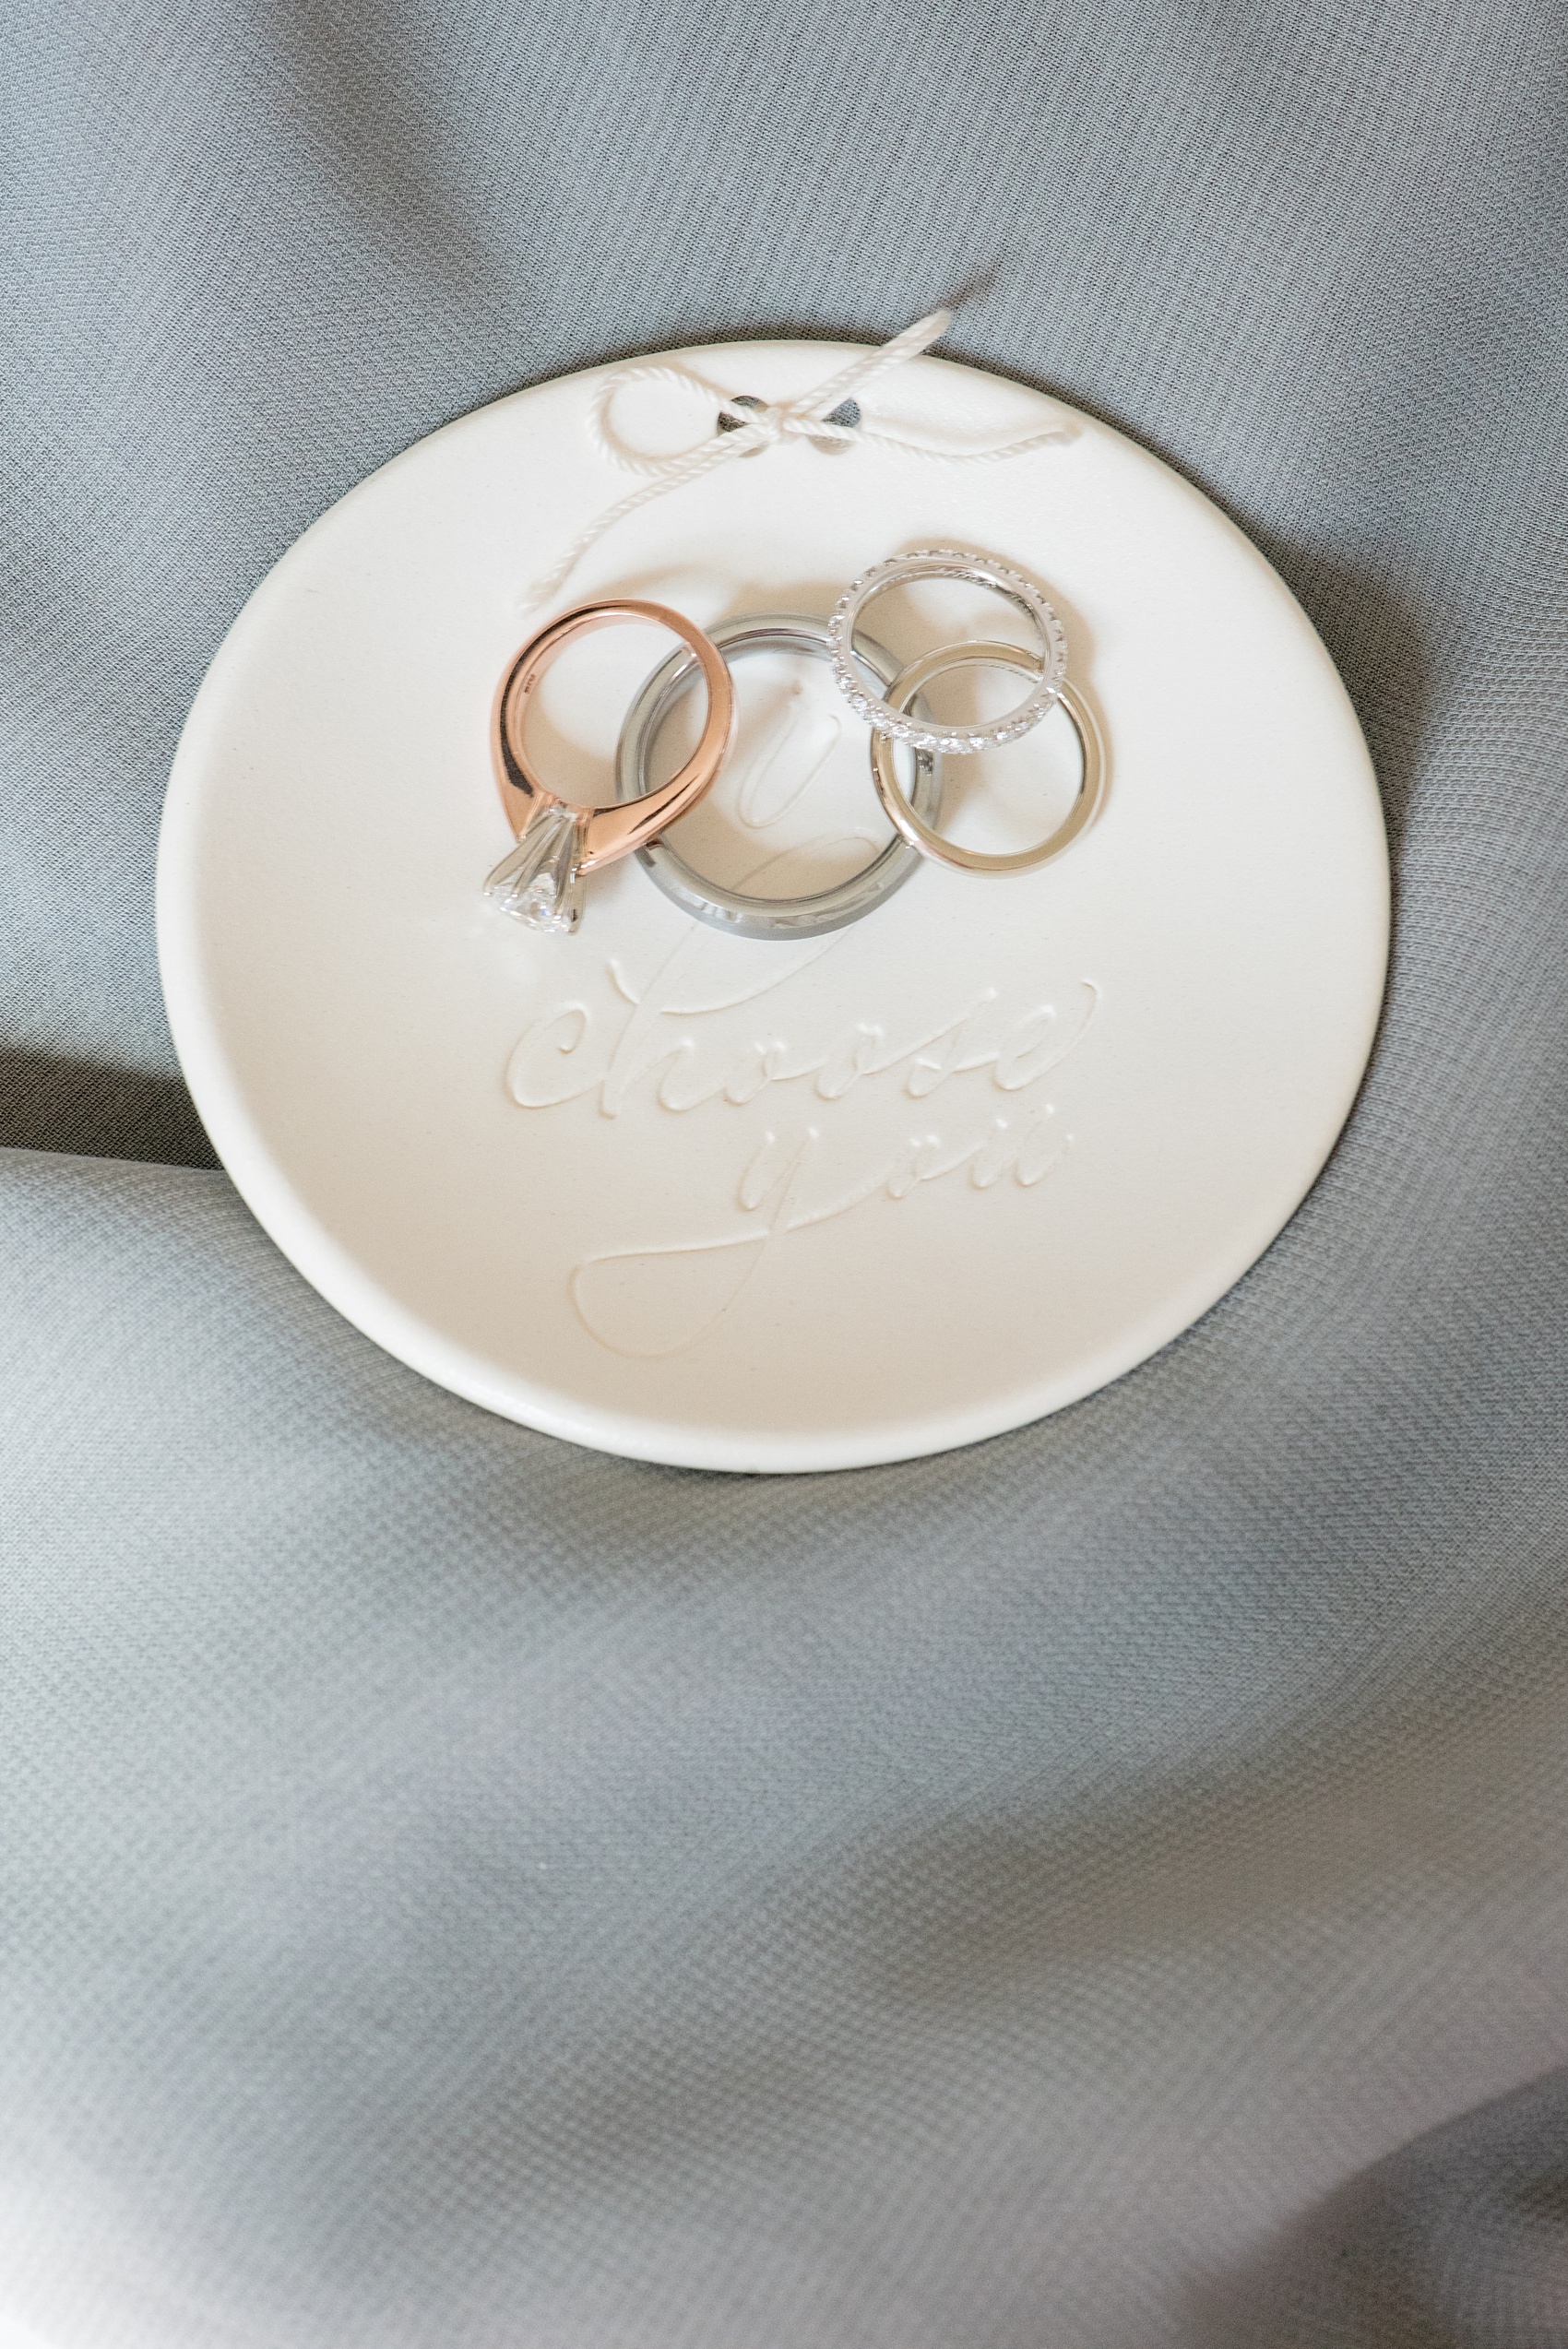 Mikkel Paige Photography photos of a luxury wedding in NYC. Ring dish from BHLDN with "I choose you" and diamond wedding bands and solitaire engagement ring detail picture.